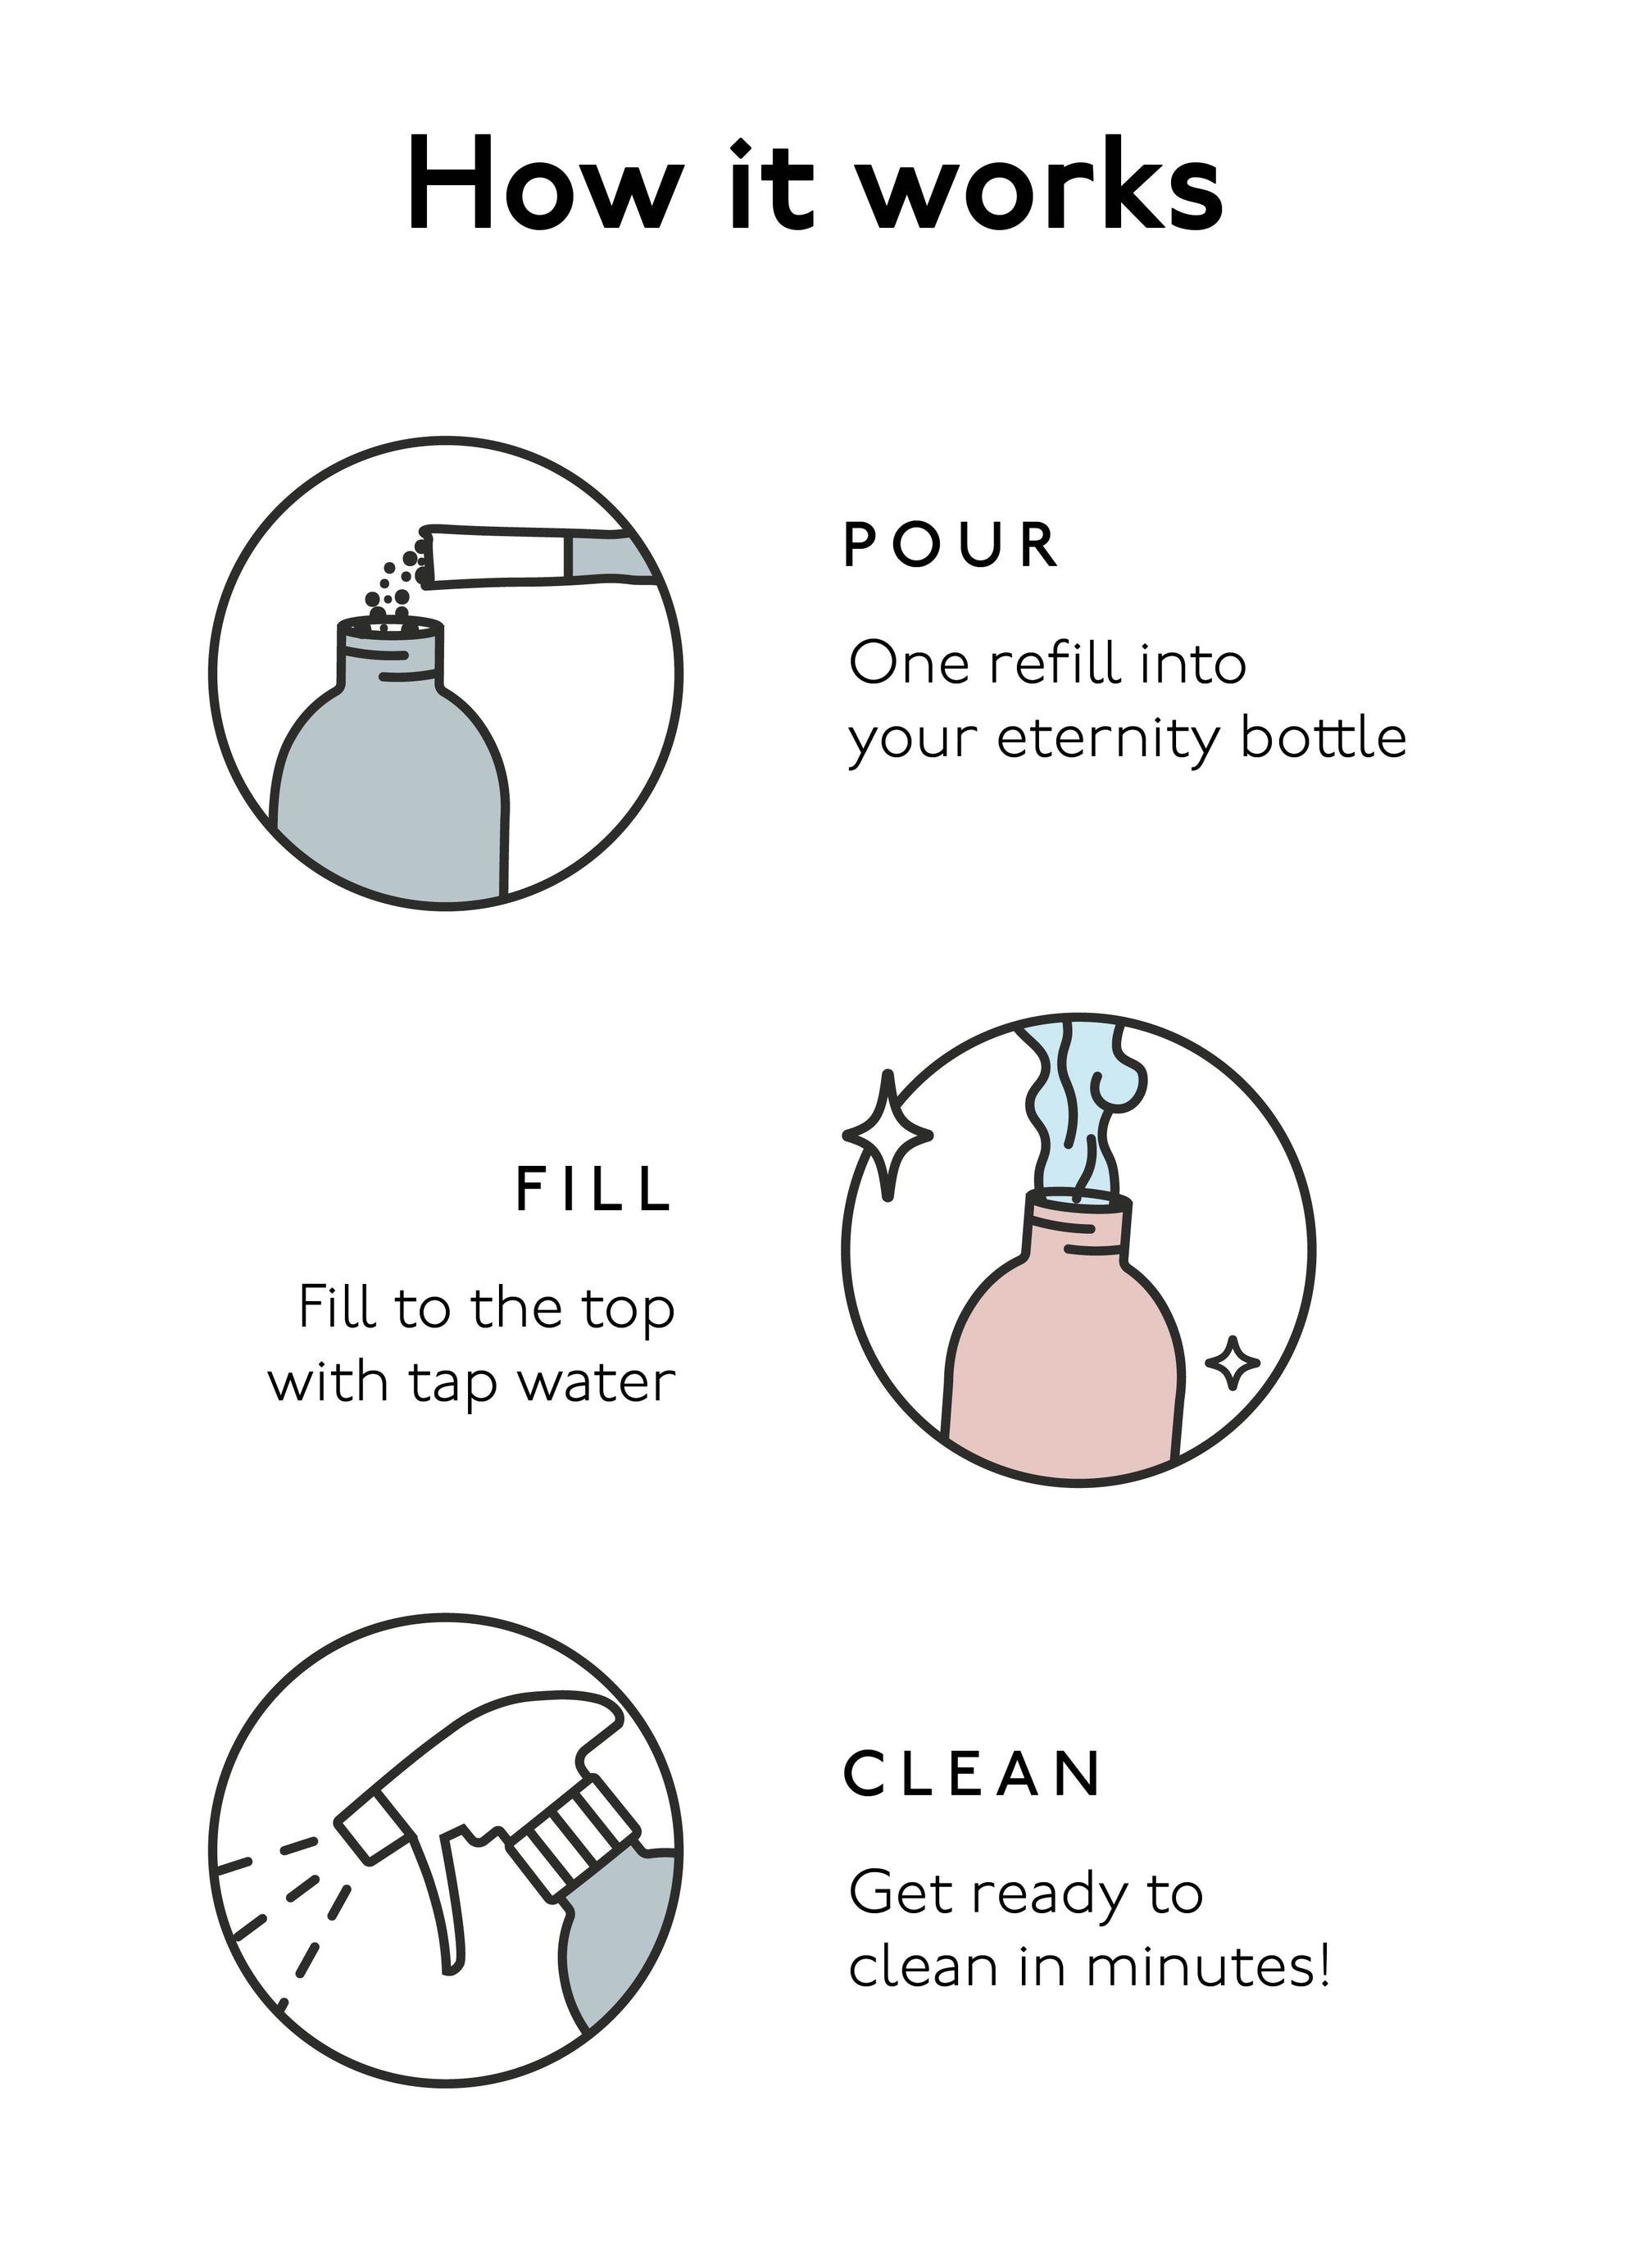 kitchen cleaning - how it works